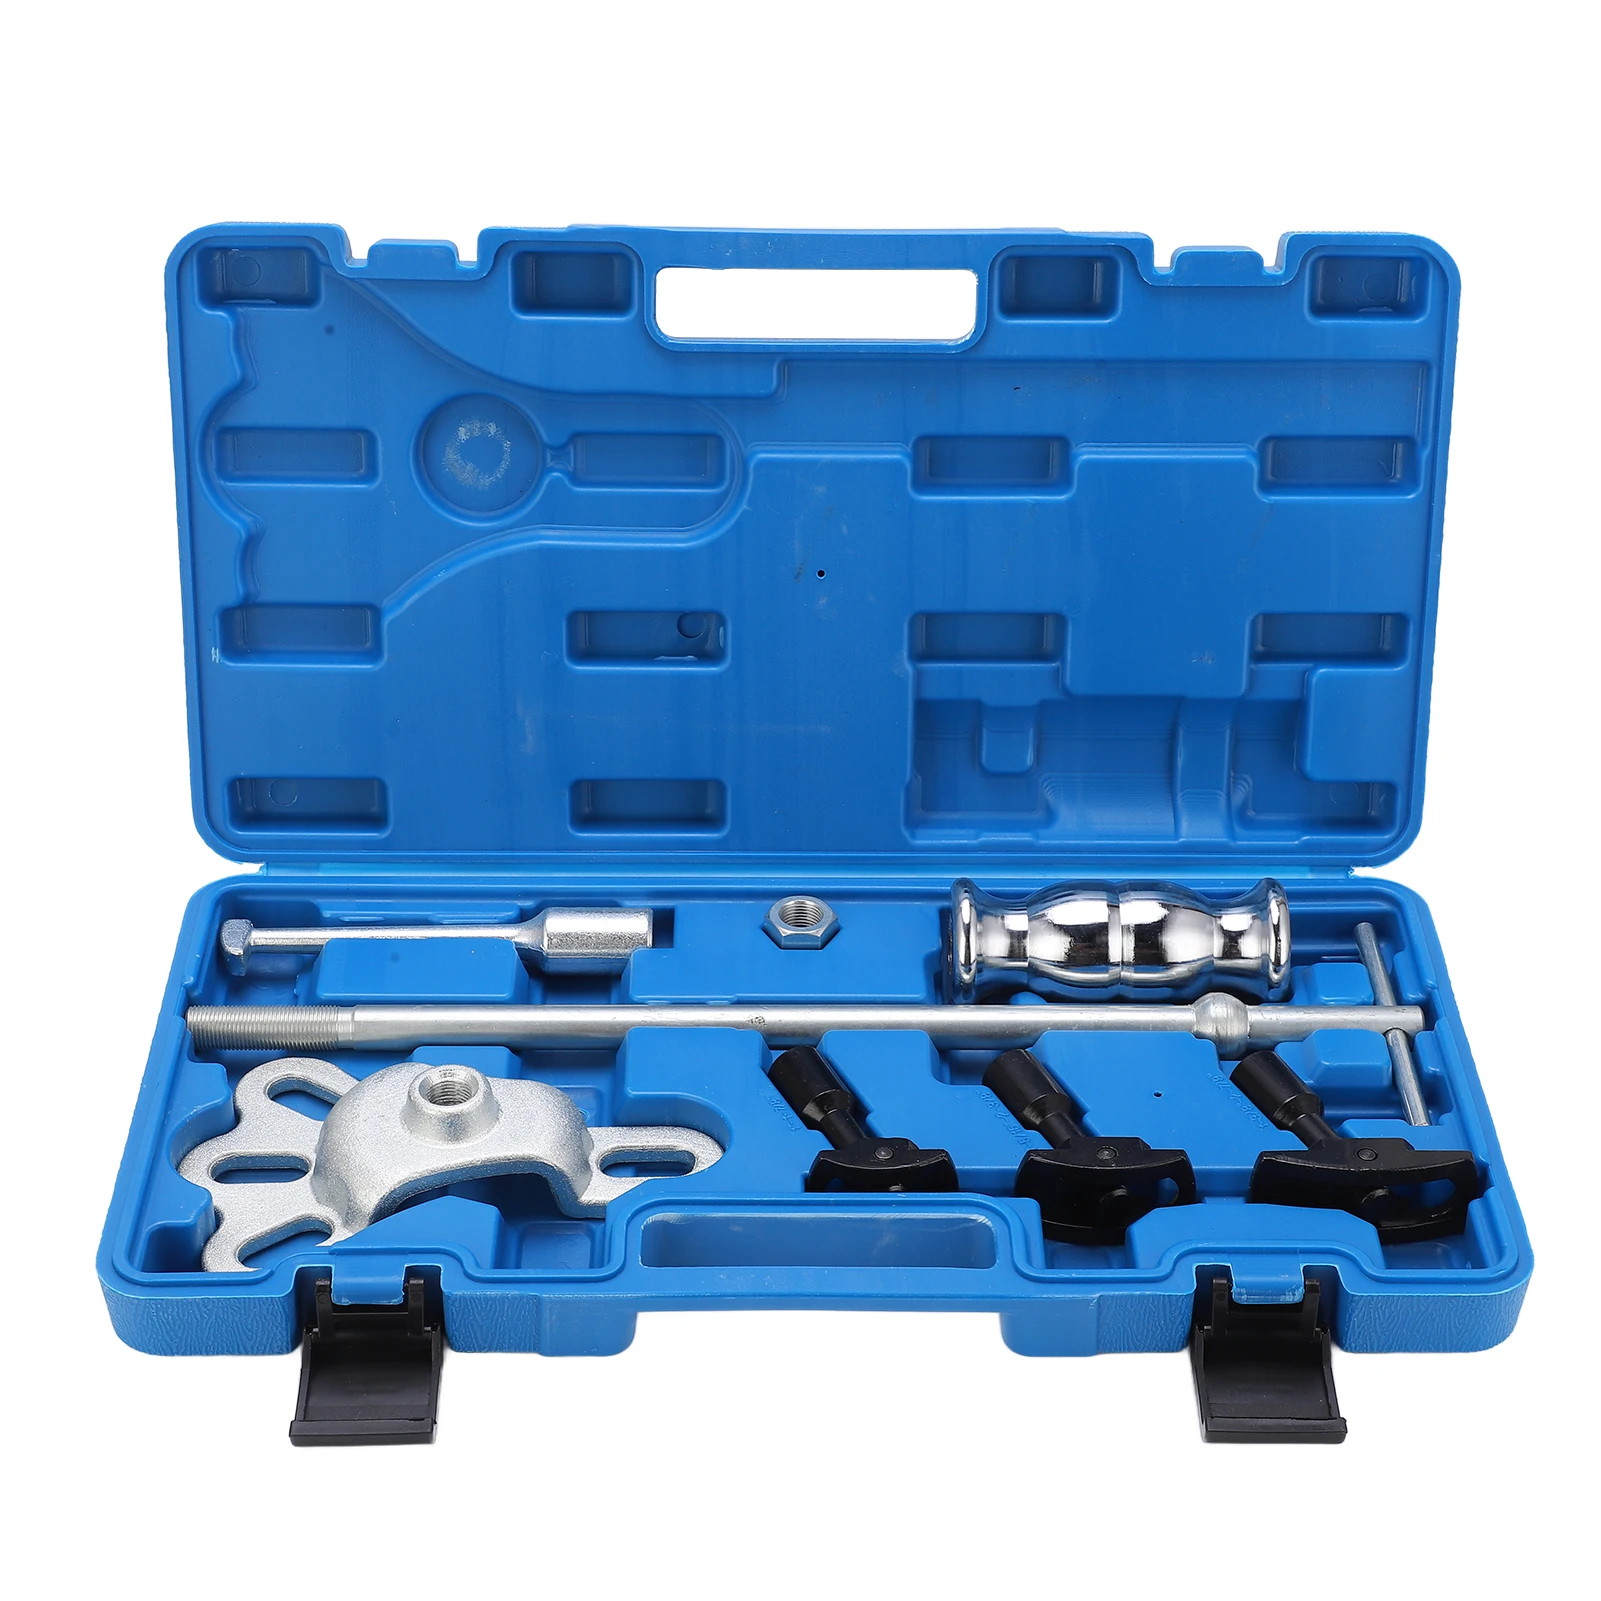 

8pcs/Set Rear Axle Bearing Puller Slide Hammer Service Repair Kit with Carrying Case Rear Axle Puller Set Rear Axle Removal Tool